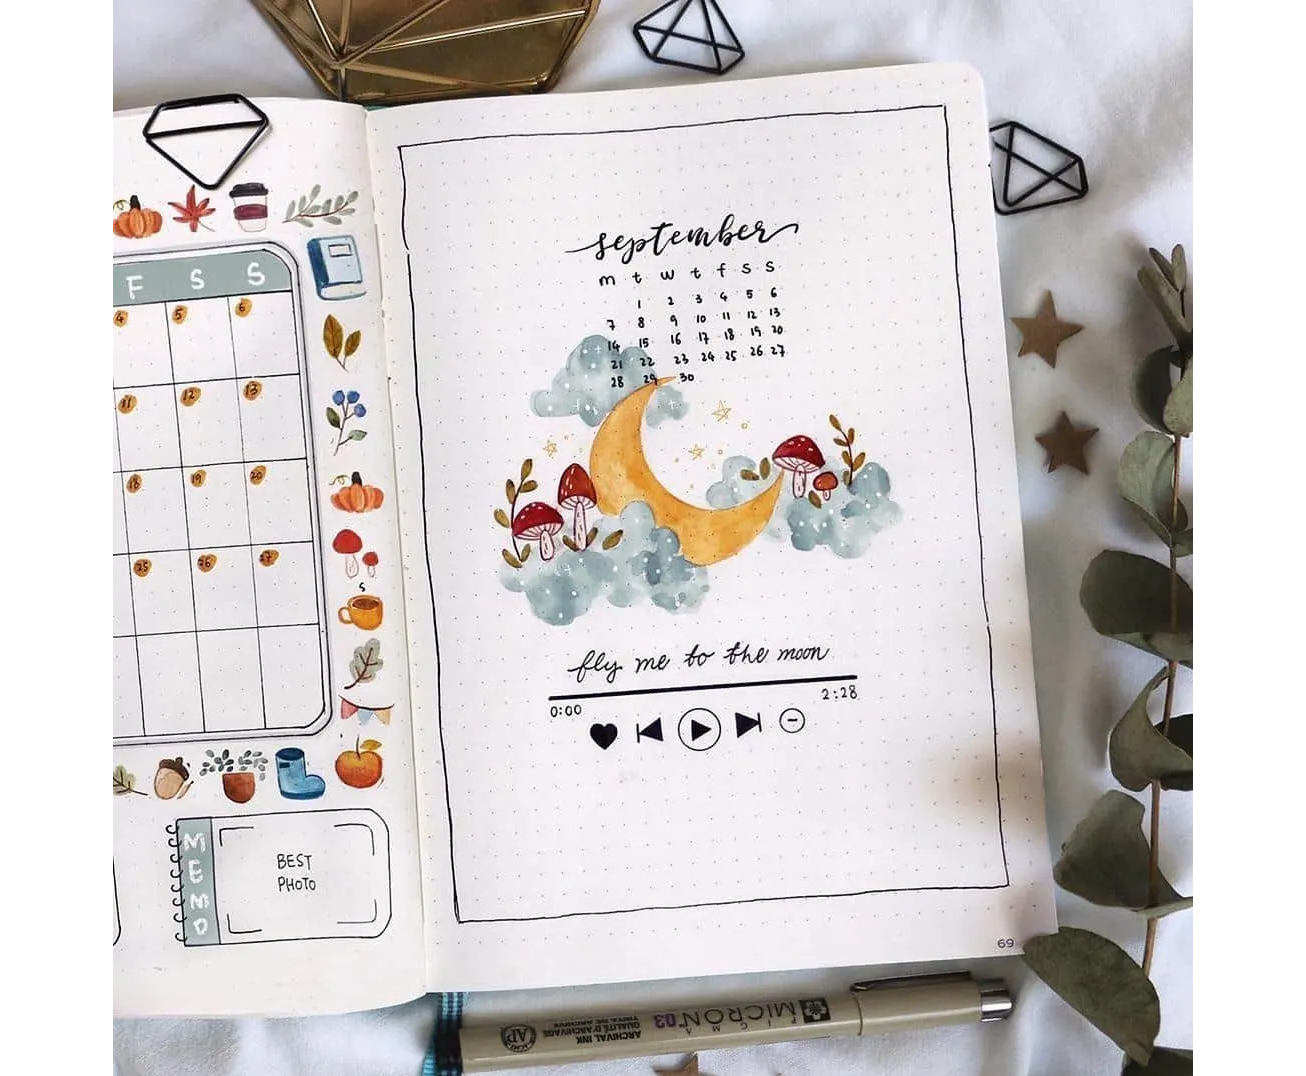 The Ultimate Guide to Bullet Journal Supplies – NotebookTherapy